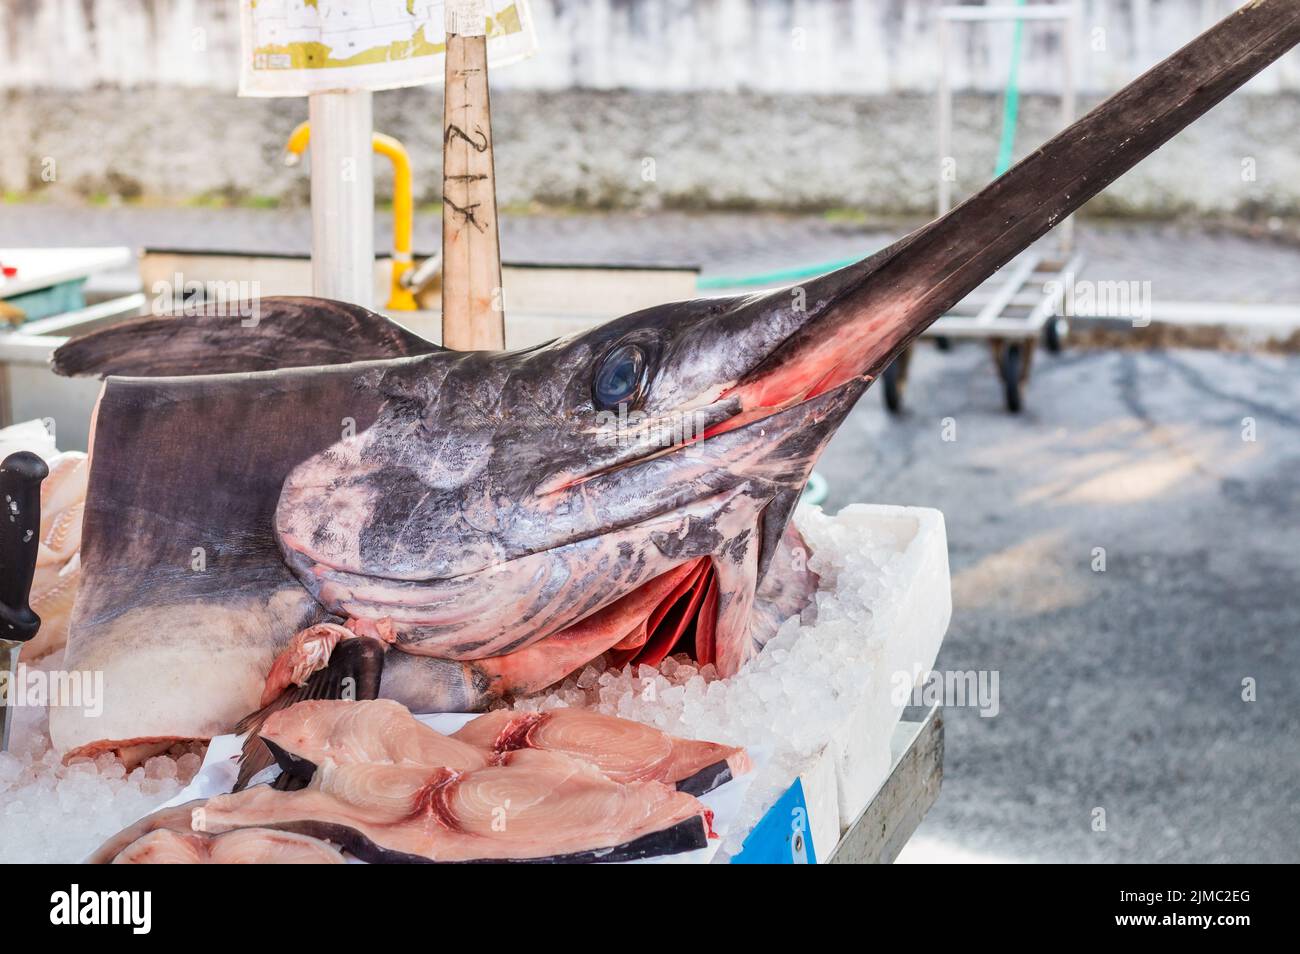 Swordfish for sale at local outdoor market Stock Photo